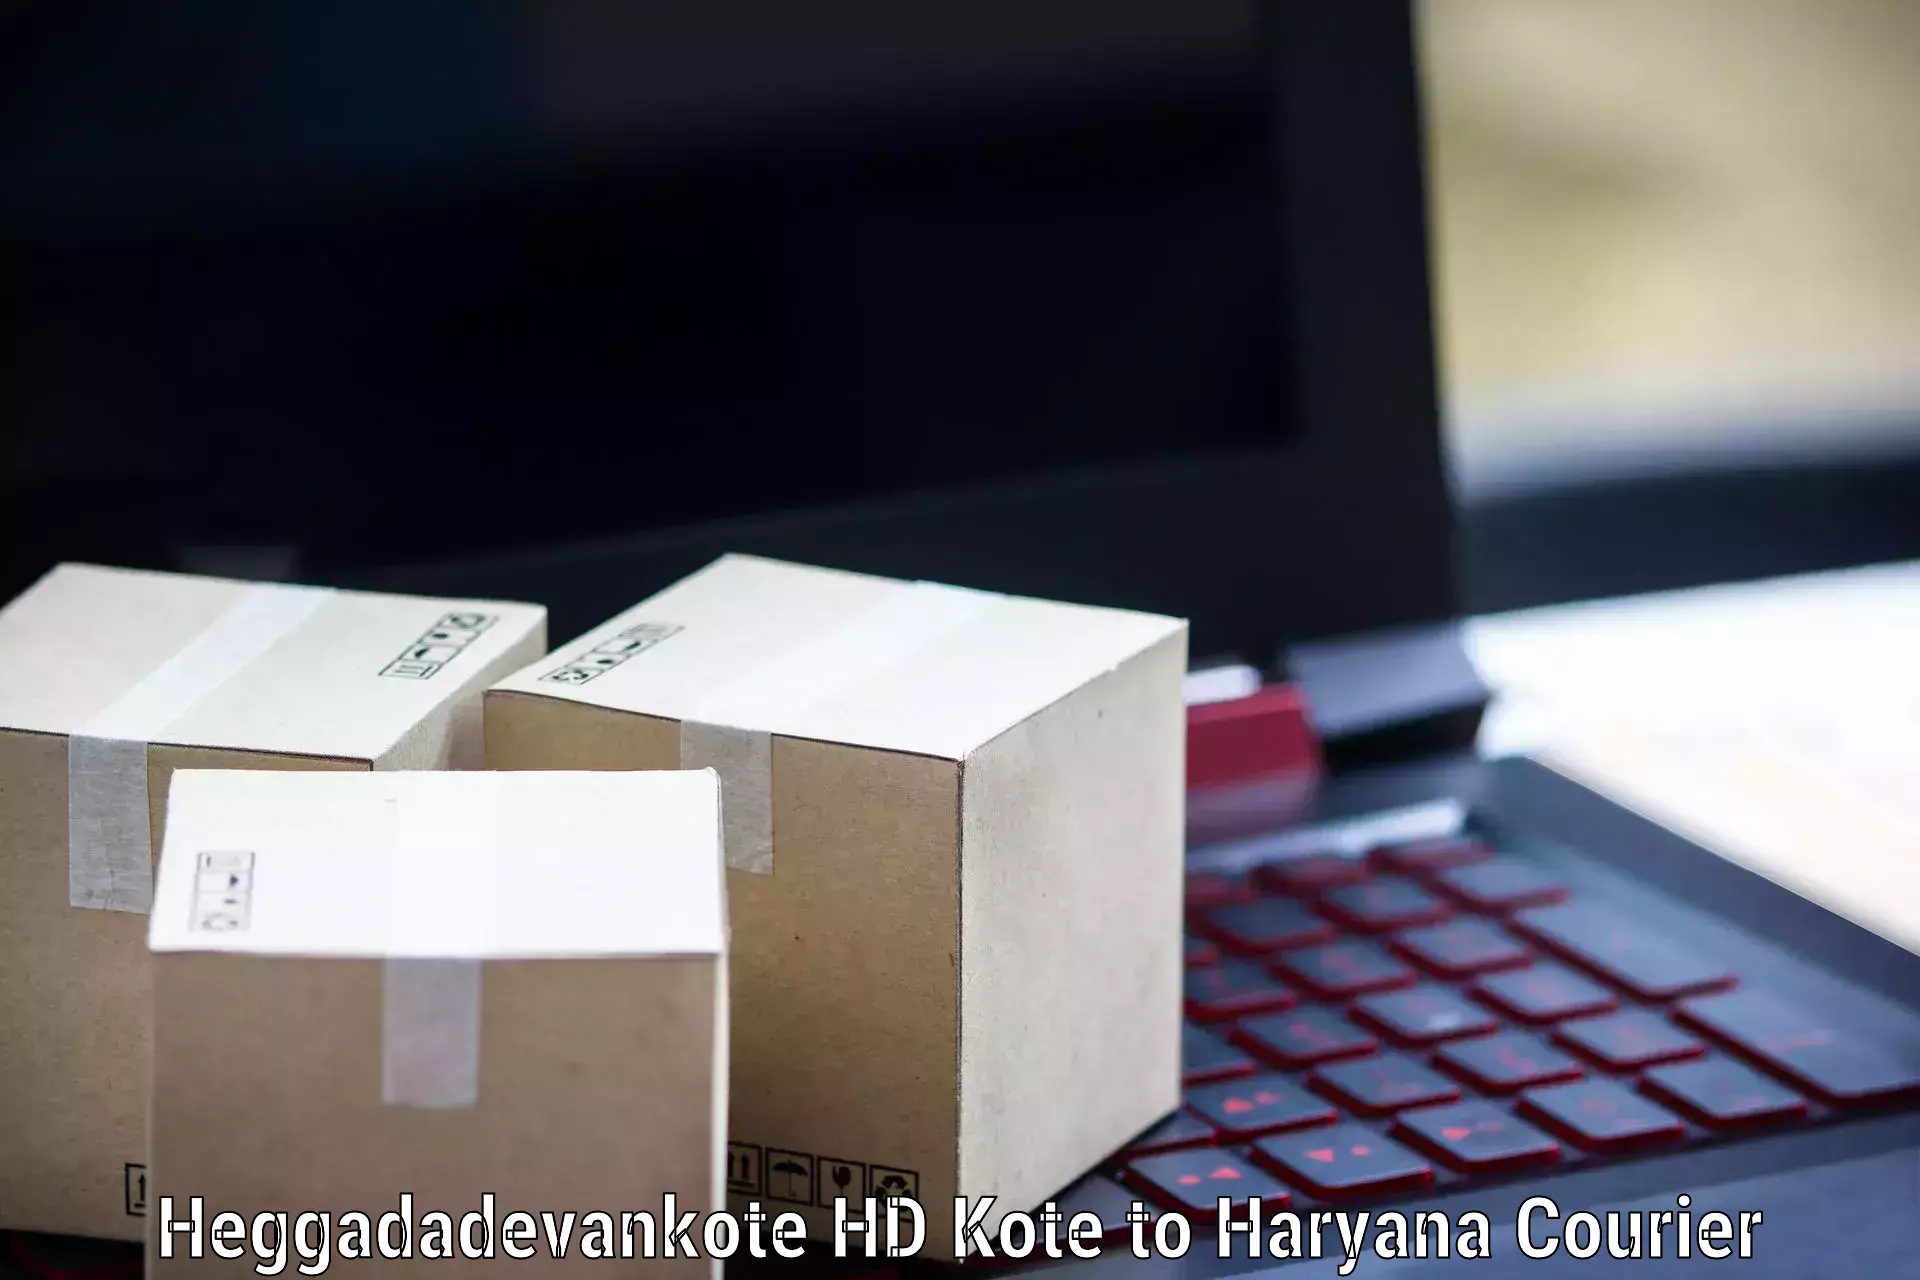 Efficient package consolidation Heggadadevankote HD Kote to Siwani